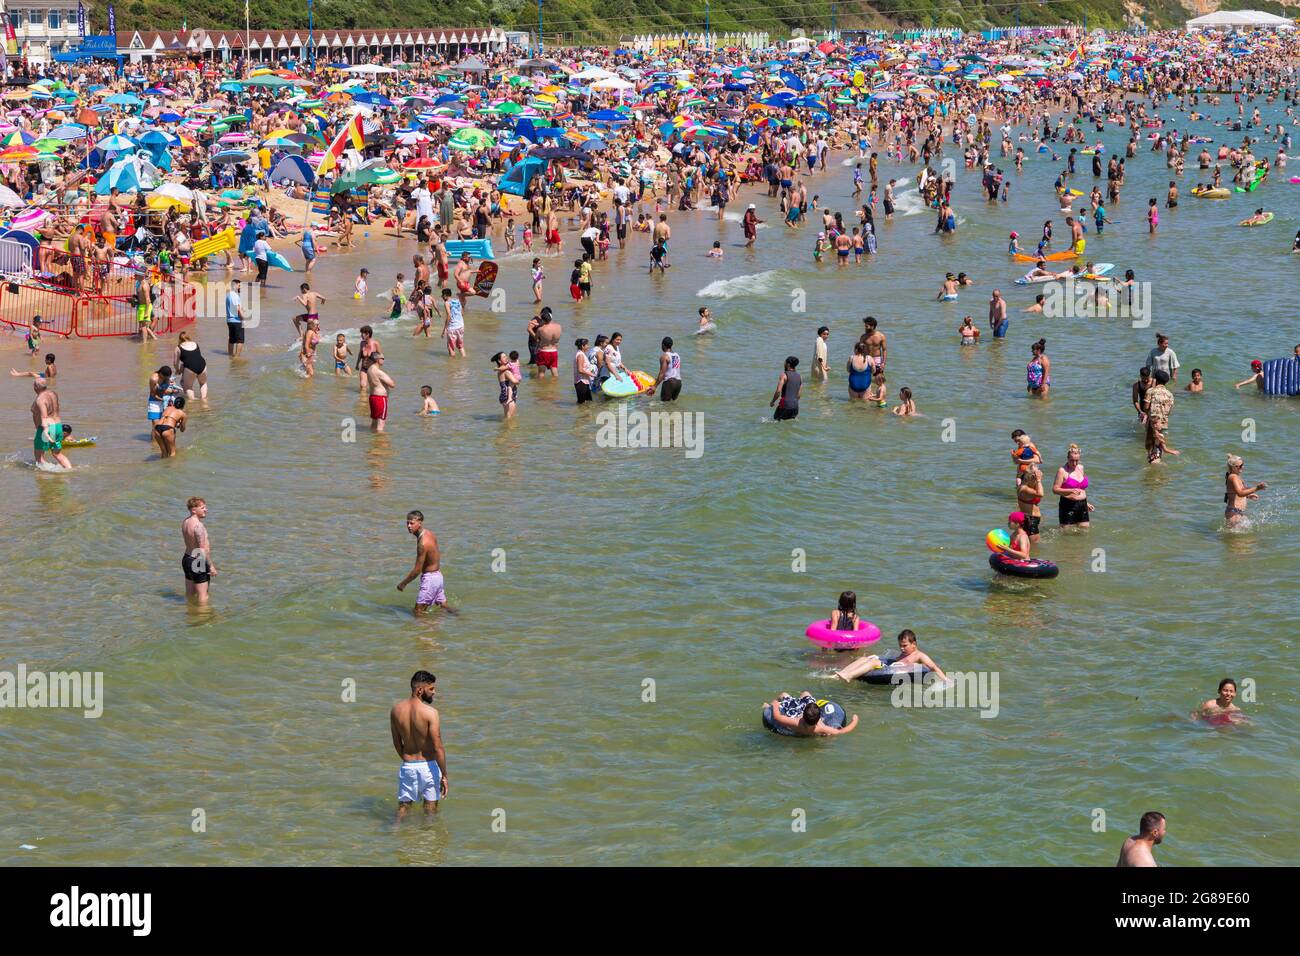 Bournemouth, Dorset UK. 18th July 2021. UK weather: hot sunny day at Bournemouth beach on the South Coast, as crowds flock to the seaside and sunseekers enjoy the sunshine in the heatwave. Beaches are packed with barely a spare space and car parks full.  Credit: Carolyn Jenkins/Alamy Live News Stock Photo